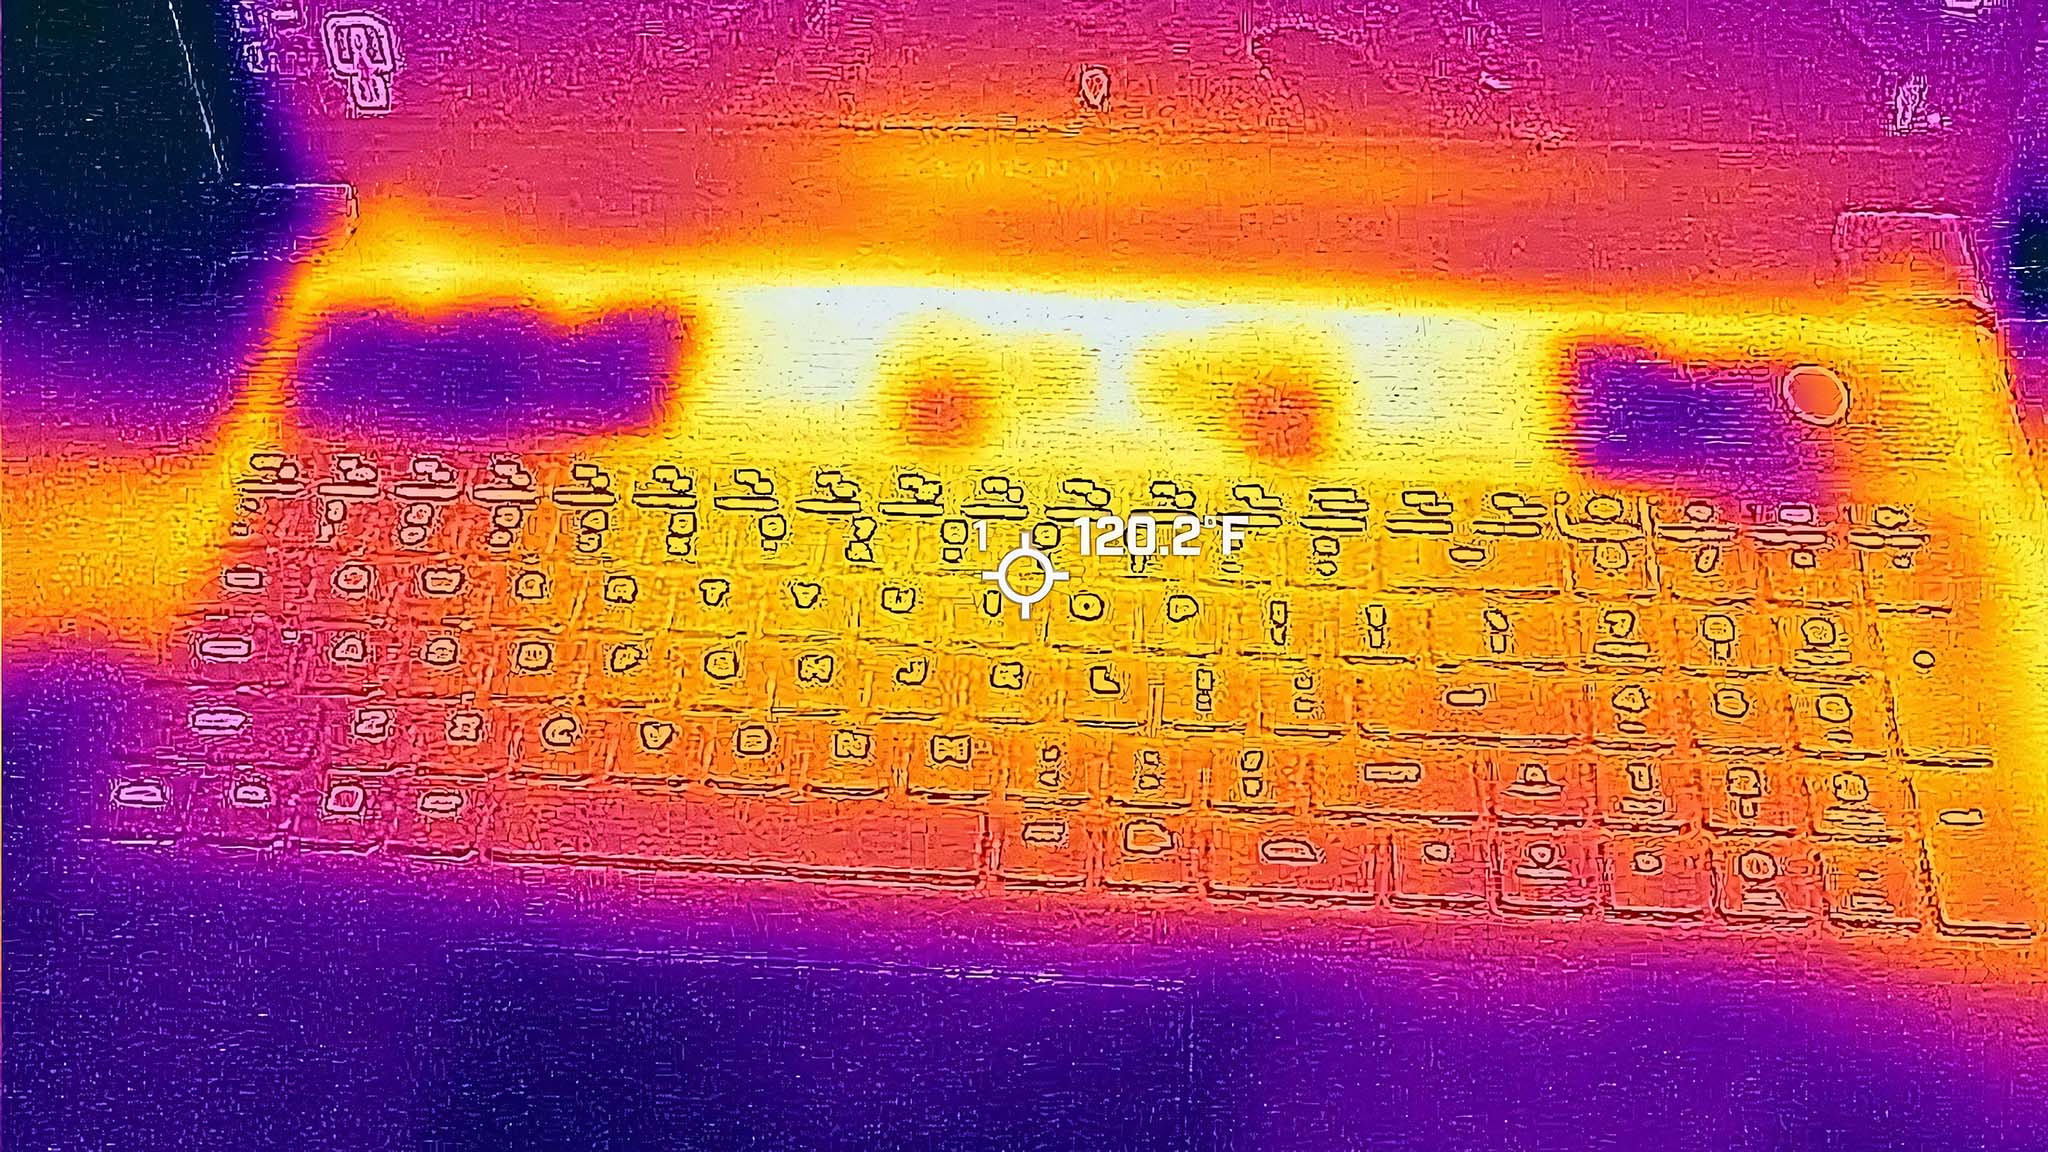 Alienware M18 R2 thermals on keyboard.